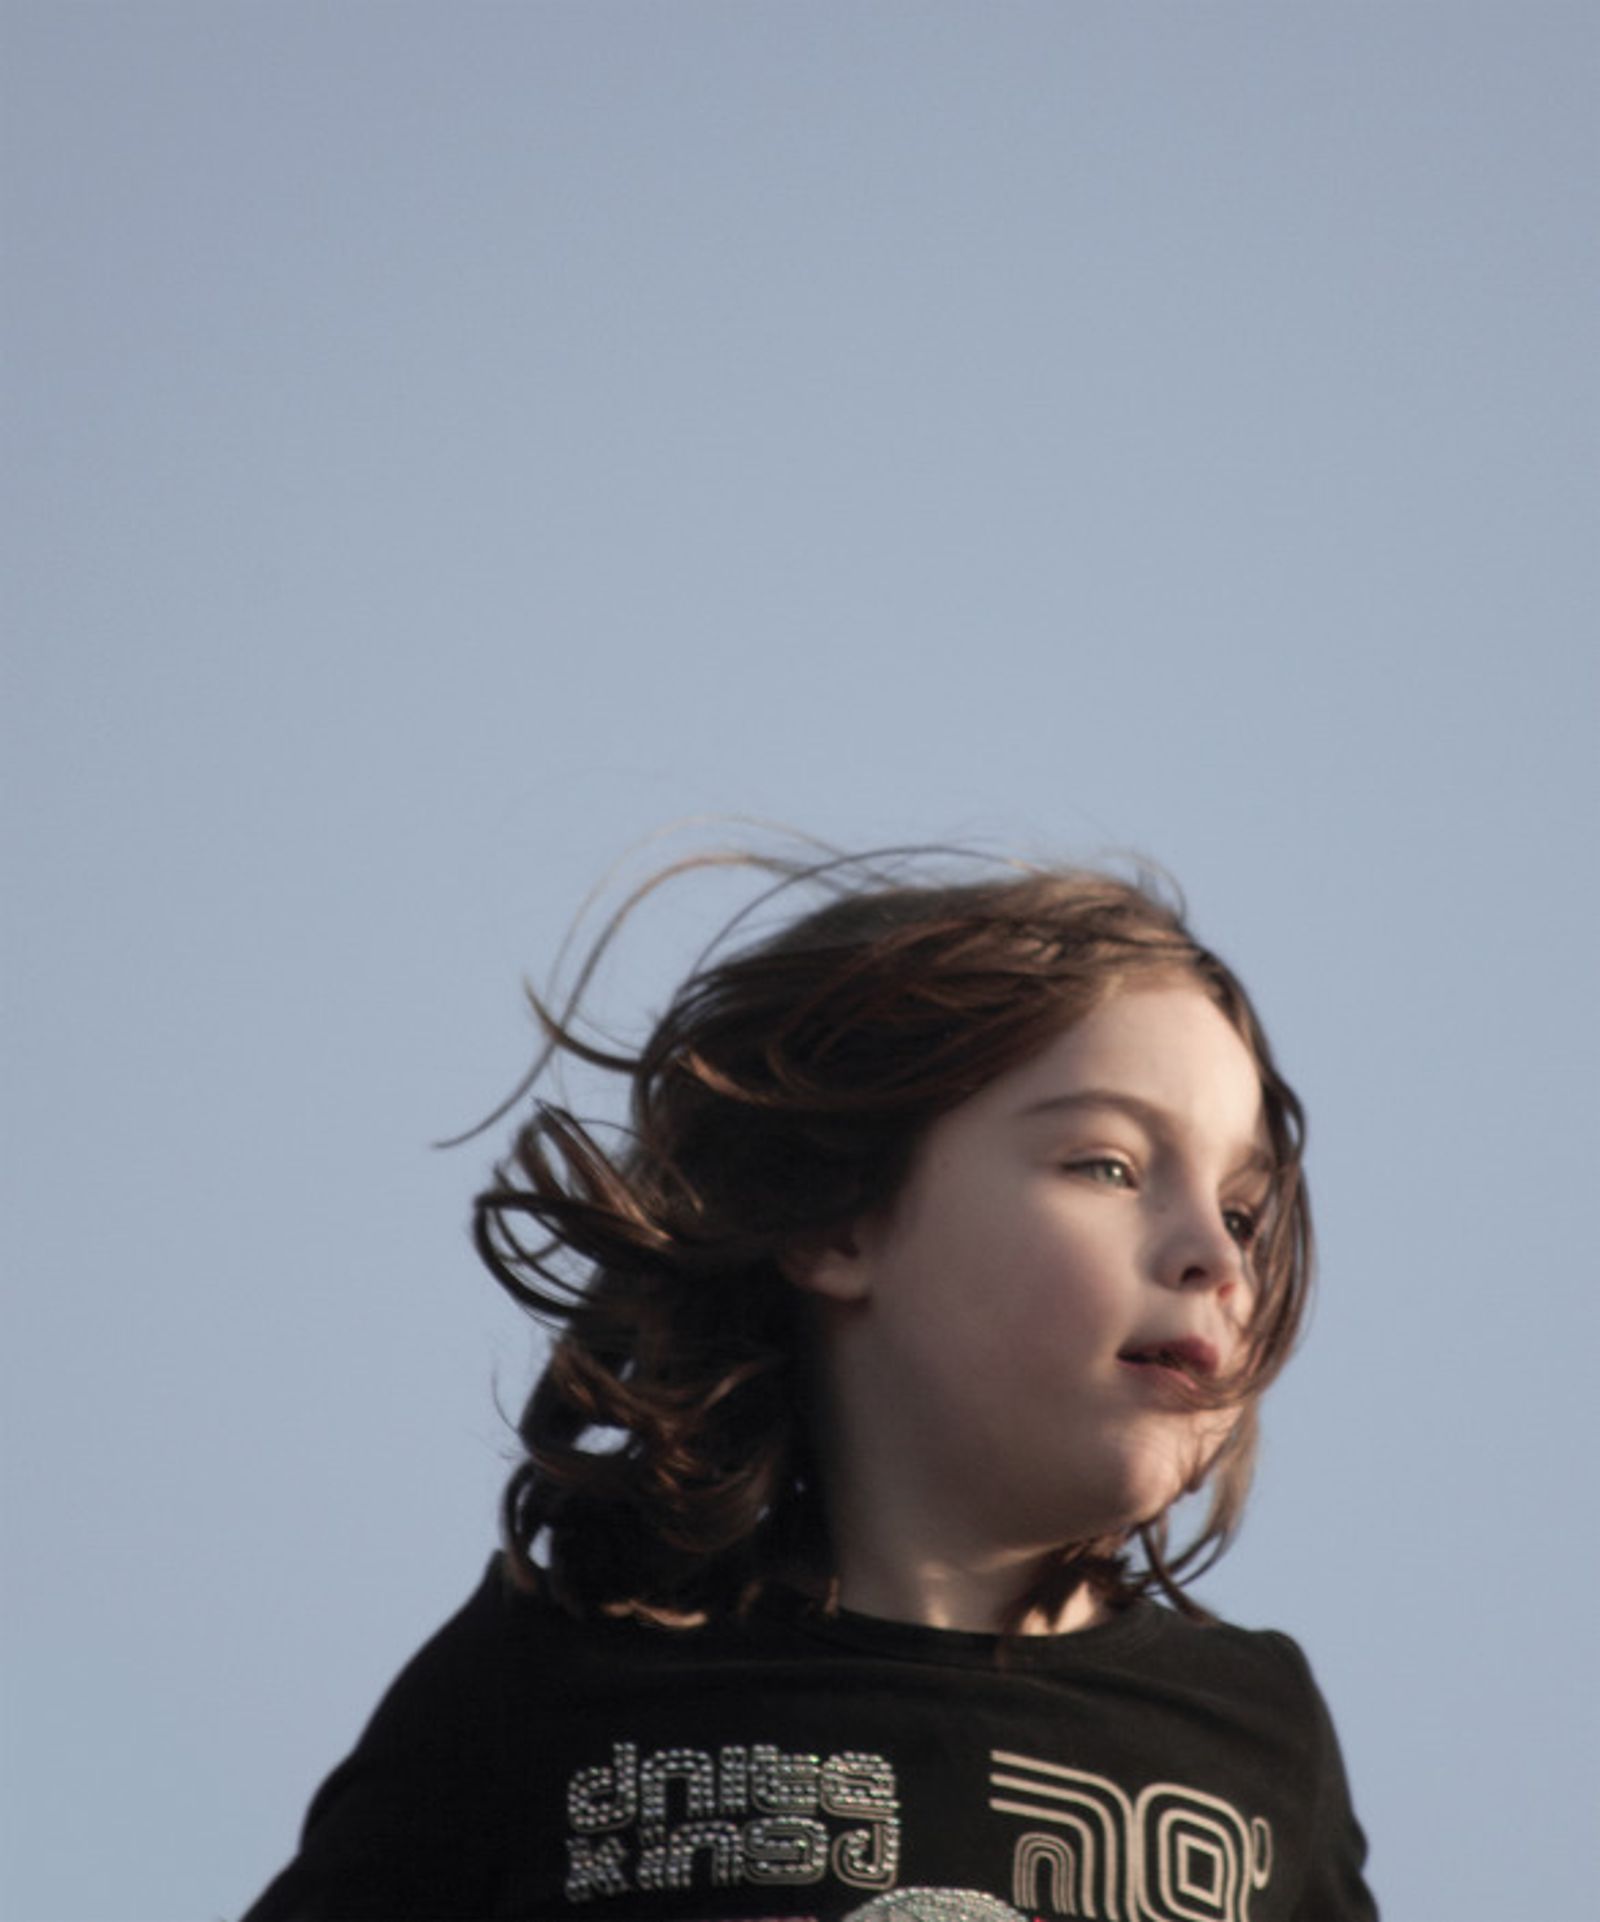 © Cemre Yeşil - Image from the When I was a kid, the clouds were blue. photography project